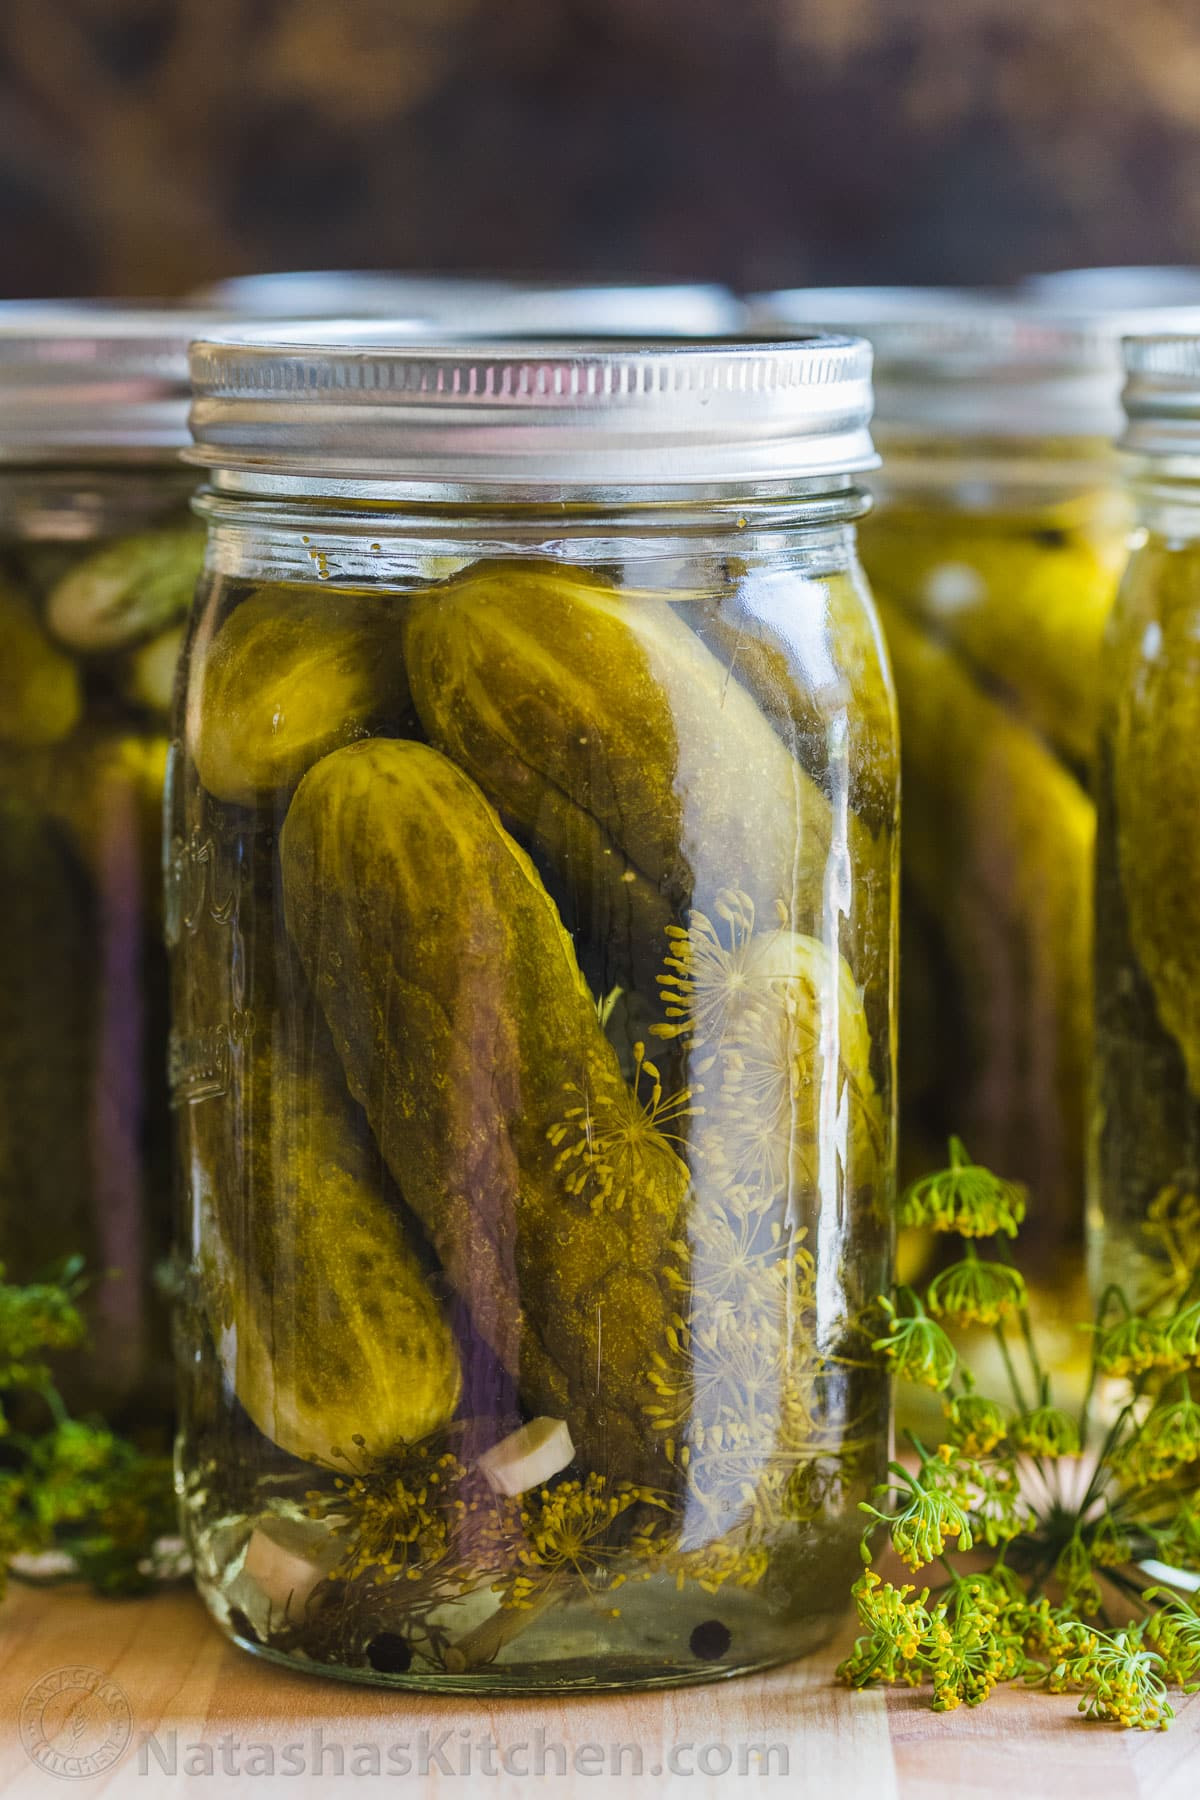 Dill Pickles Recipes Canning
 Canned Dill Pickle Recipe NatashasKitchen